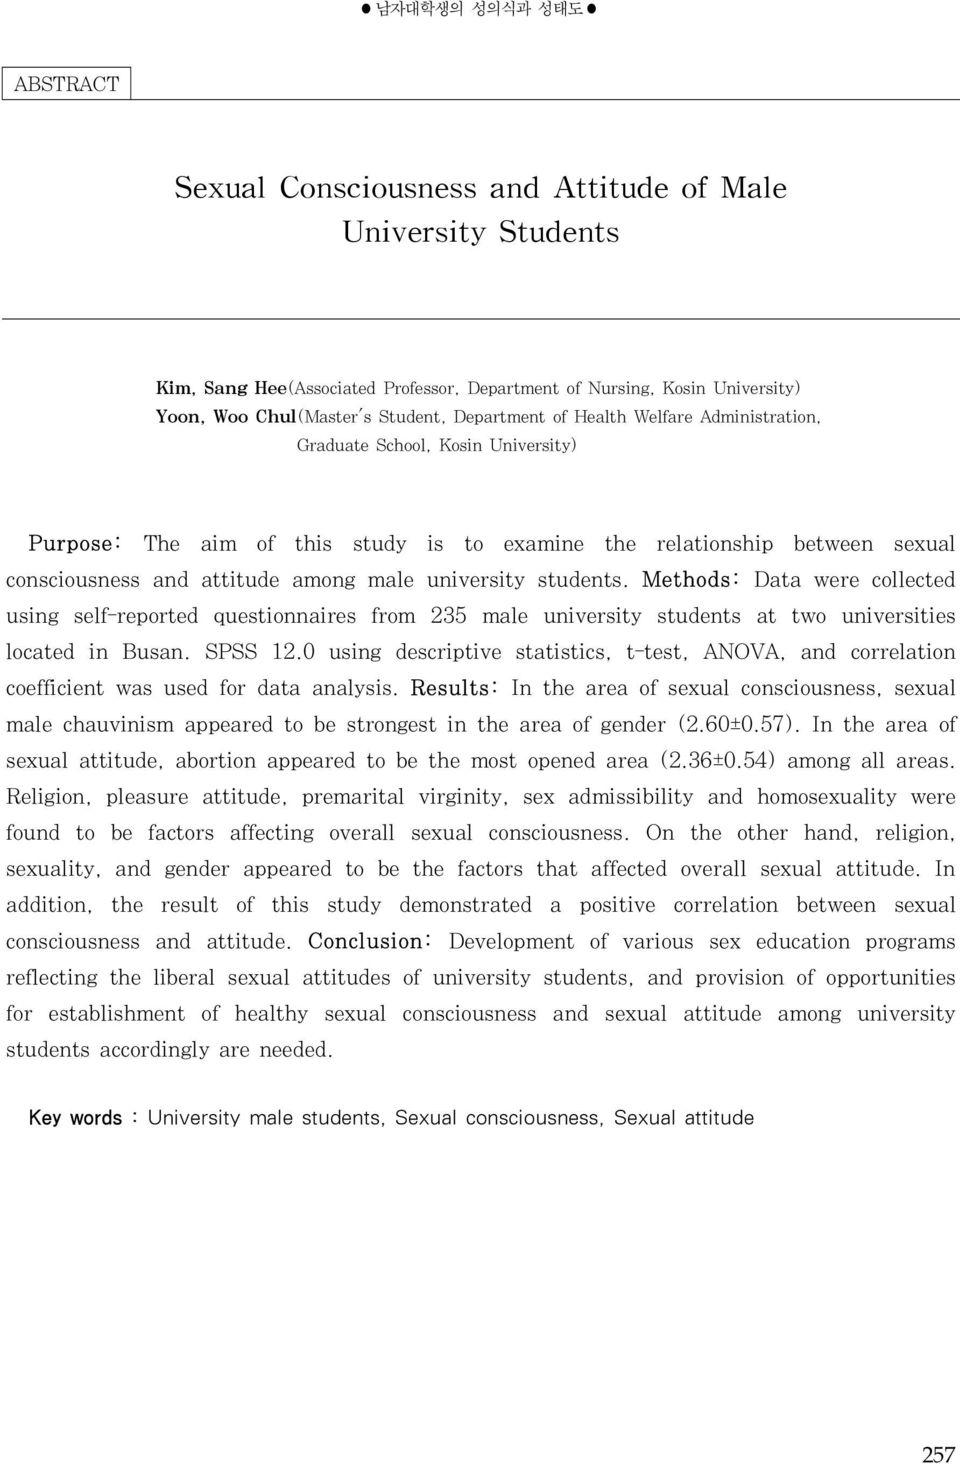 university students. Methods: Data were collected using self-reported questionnaires from 235 male university students at two universities located in Busan. SPSS 12.